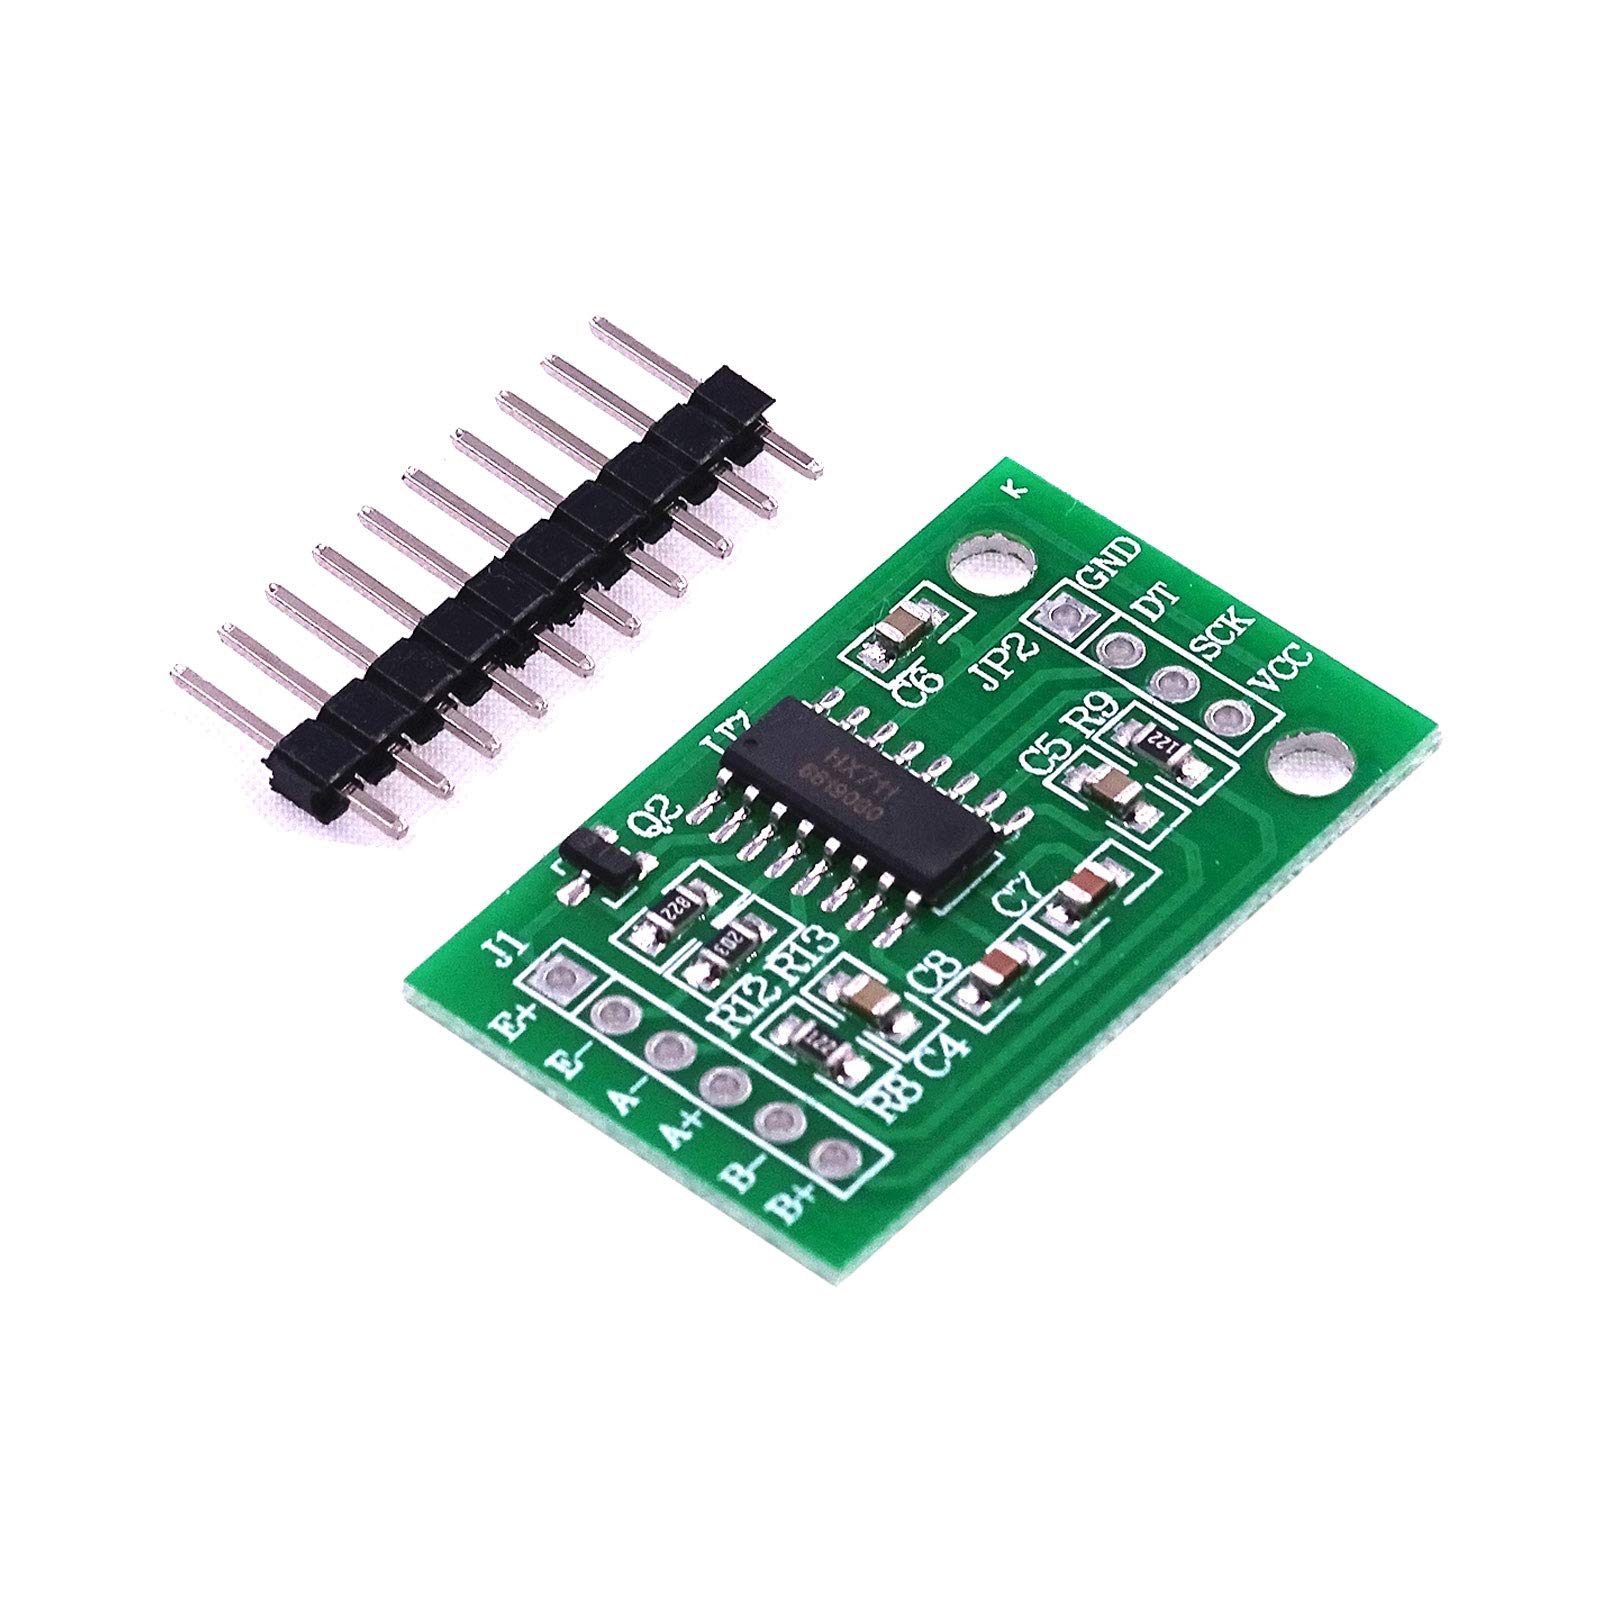 ALAMSCN Digital Load Cell Weight Sensor + HX711 Weighing Breakout Board AD Module Pressure Sensors for Arduino DIY Electronic Portable Kitchen Scale (1KG+HX711)